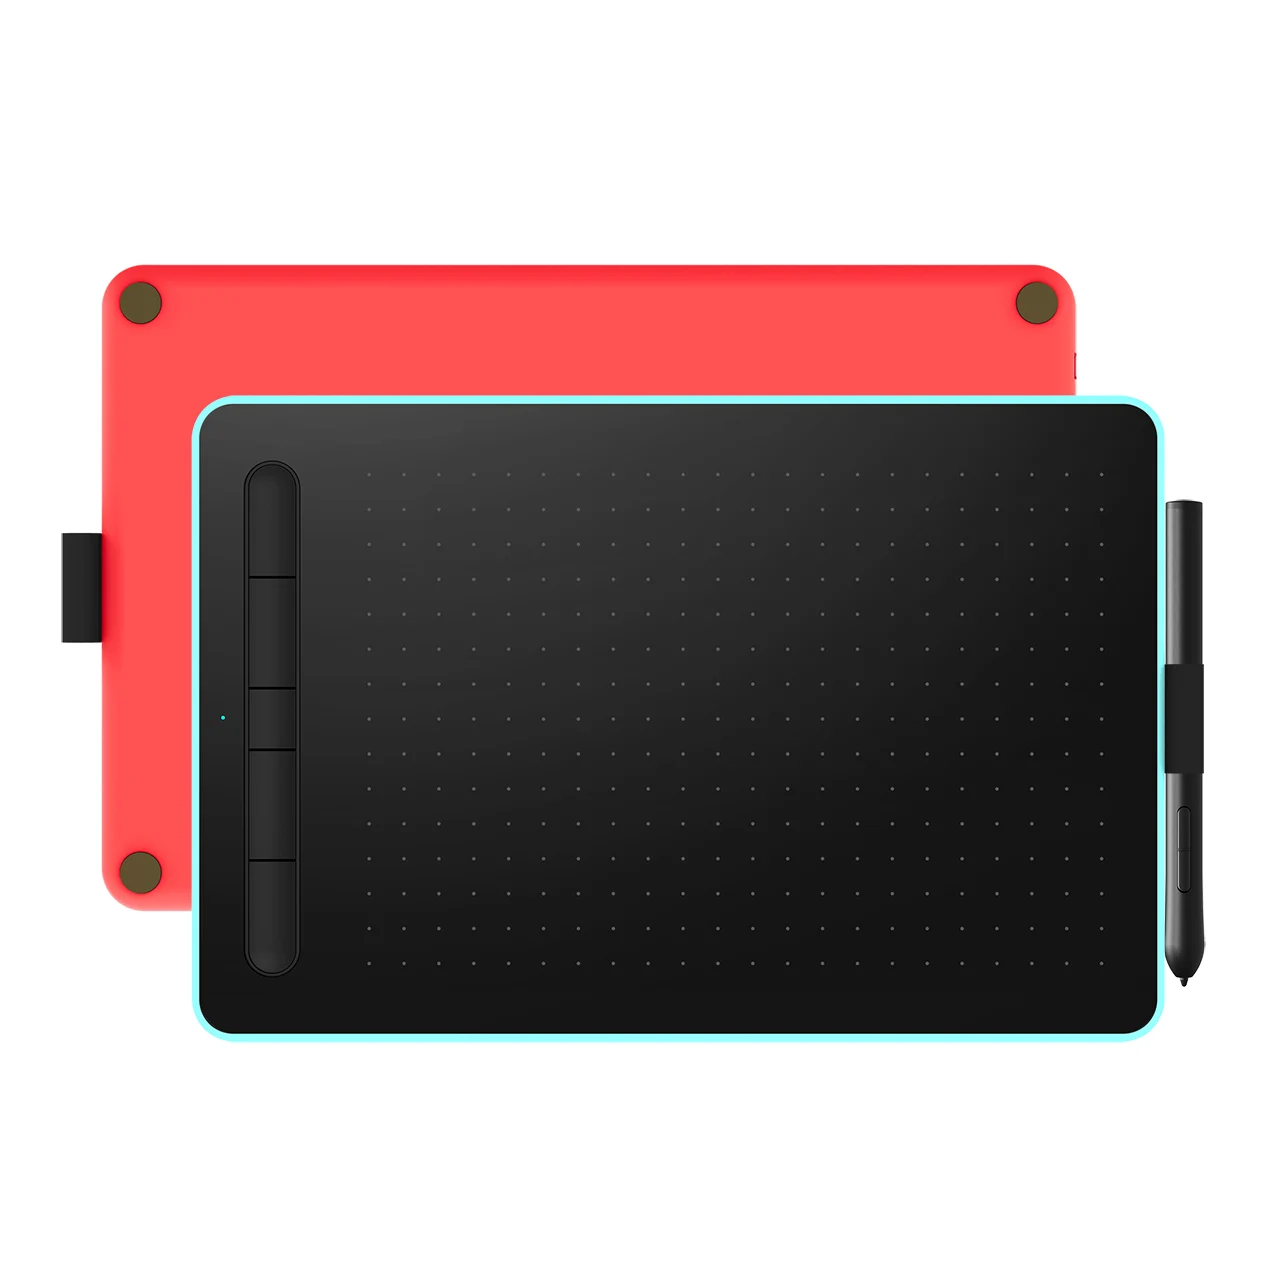 Graphics Drawing Tablet with 8192 Levels Pressure Sensitivity 5080LPI Resolution Pen Pad